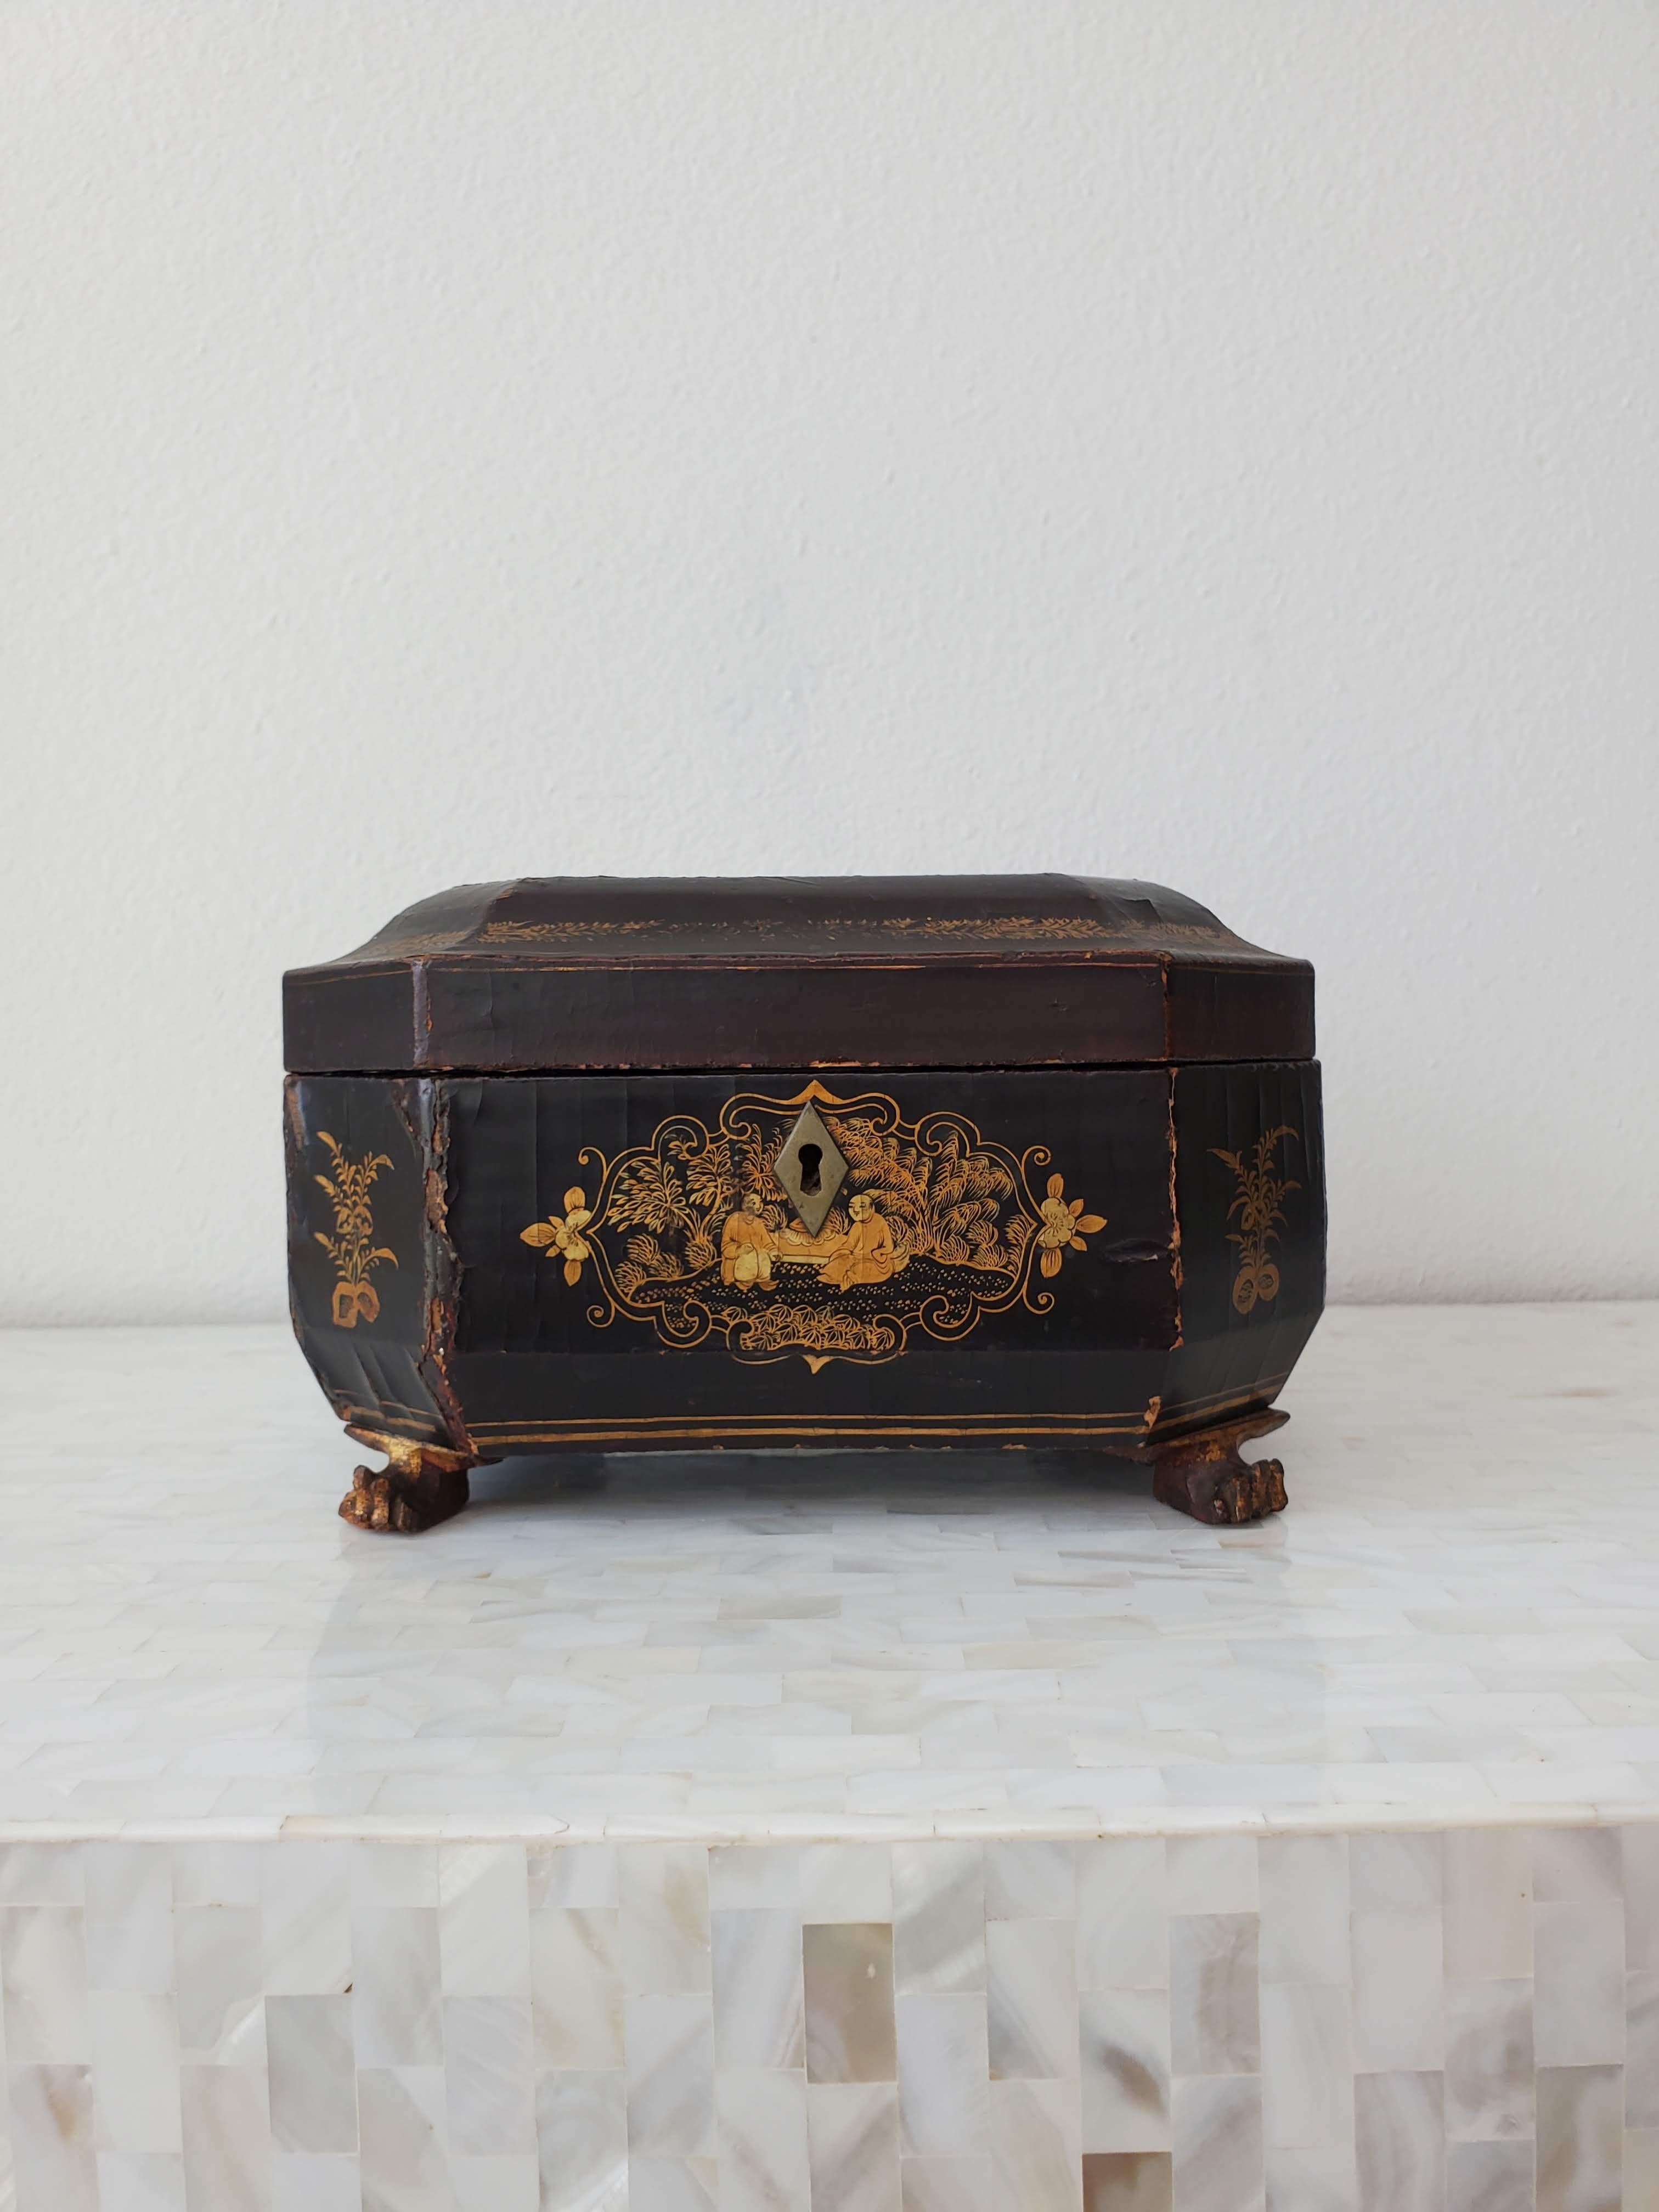 A stunning antique Qing Dynasty Chinese export twin canister tea caddy / decorative table box. circa 1860

Hand-crafted in China for the European market when rare and exotic oriental / Asian style was at the height of popularity in the Victorian